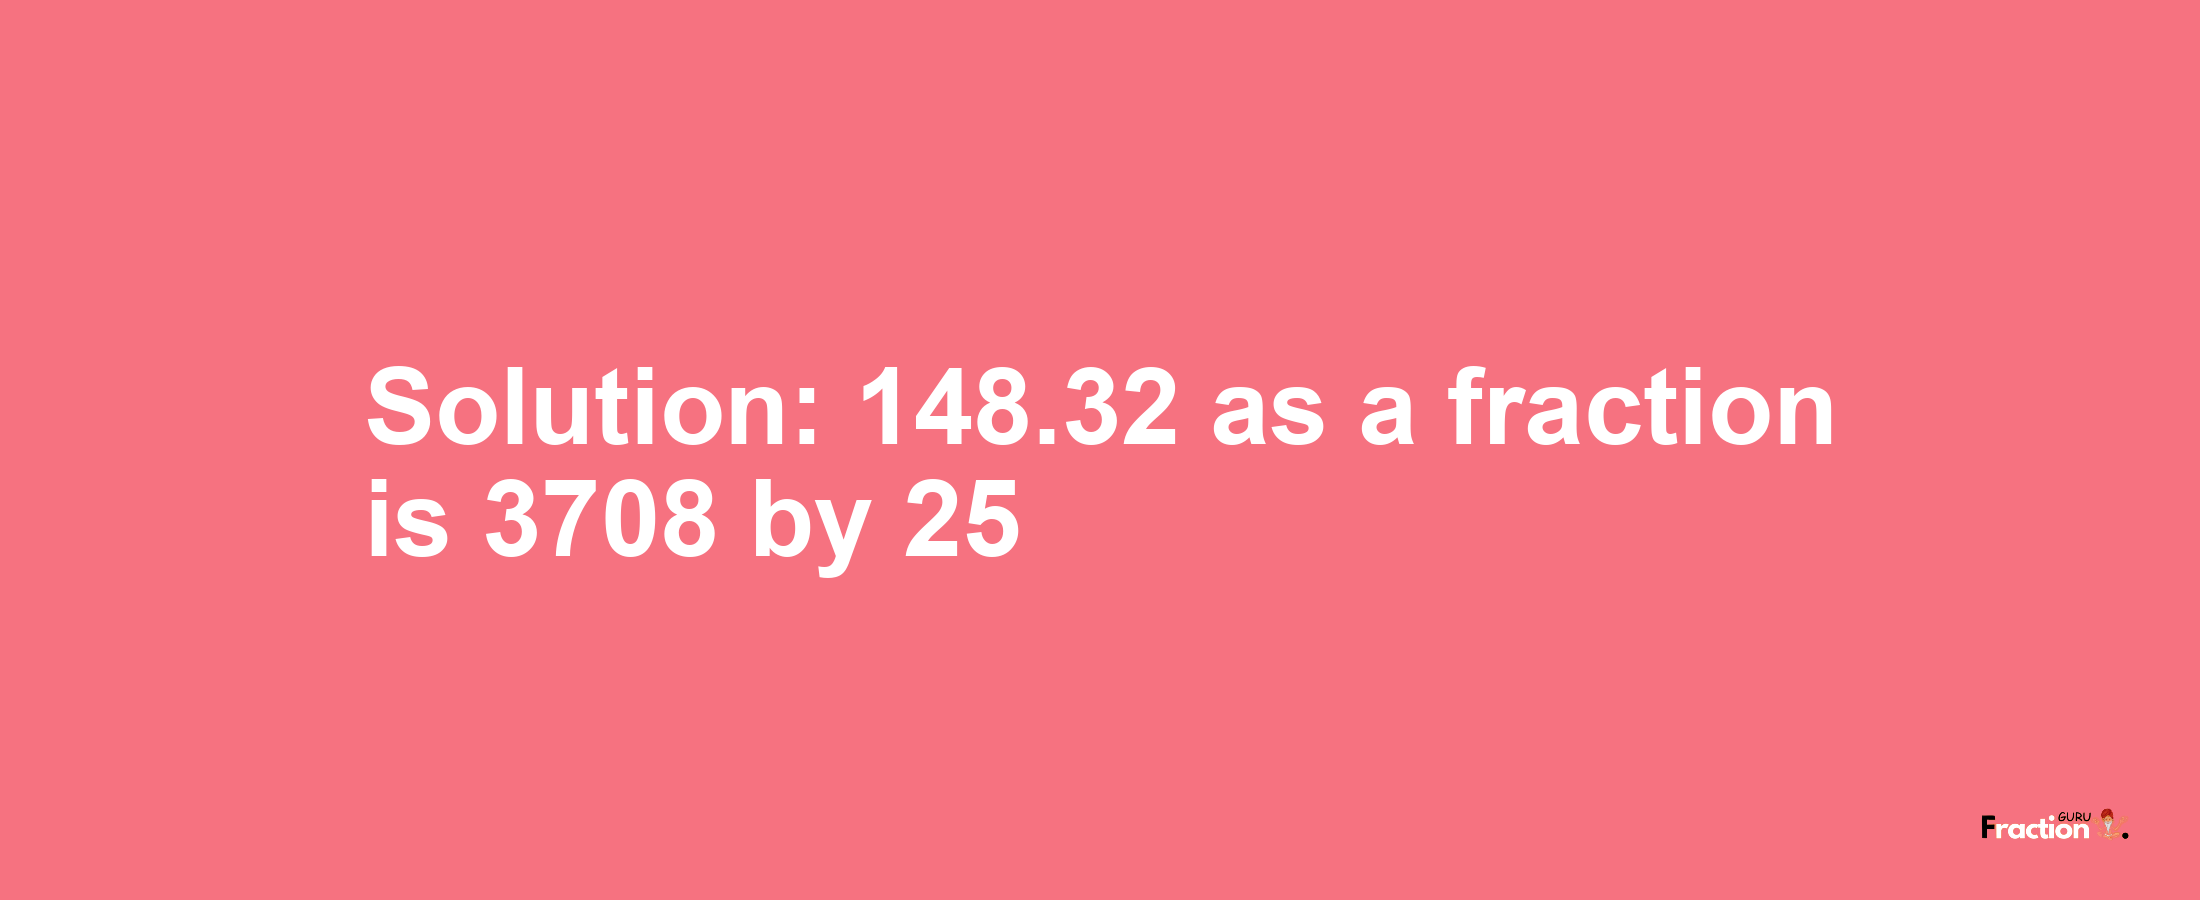 Solution:148.32 as a fraction is 3708/25